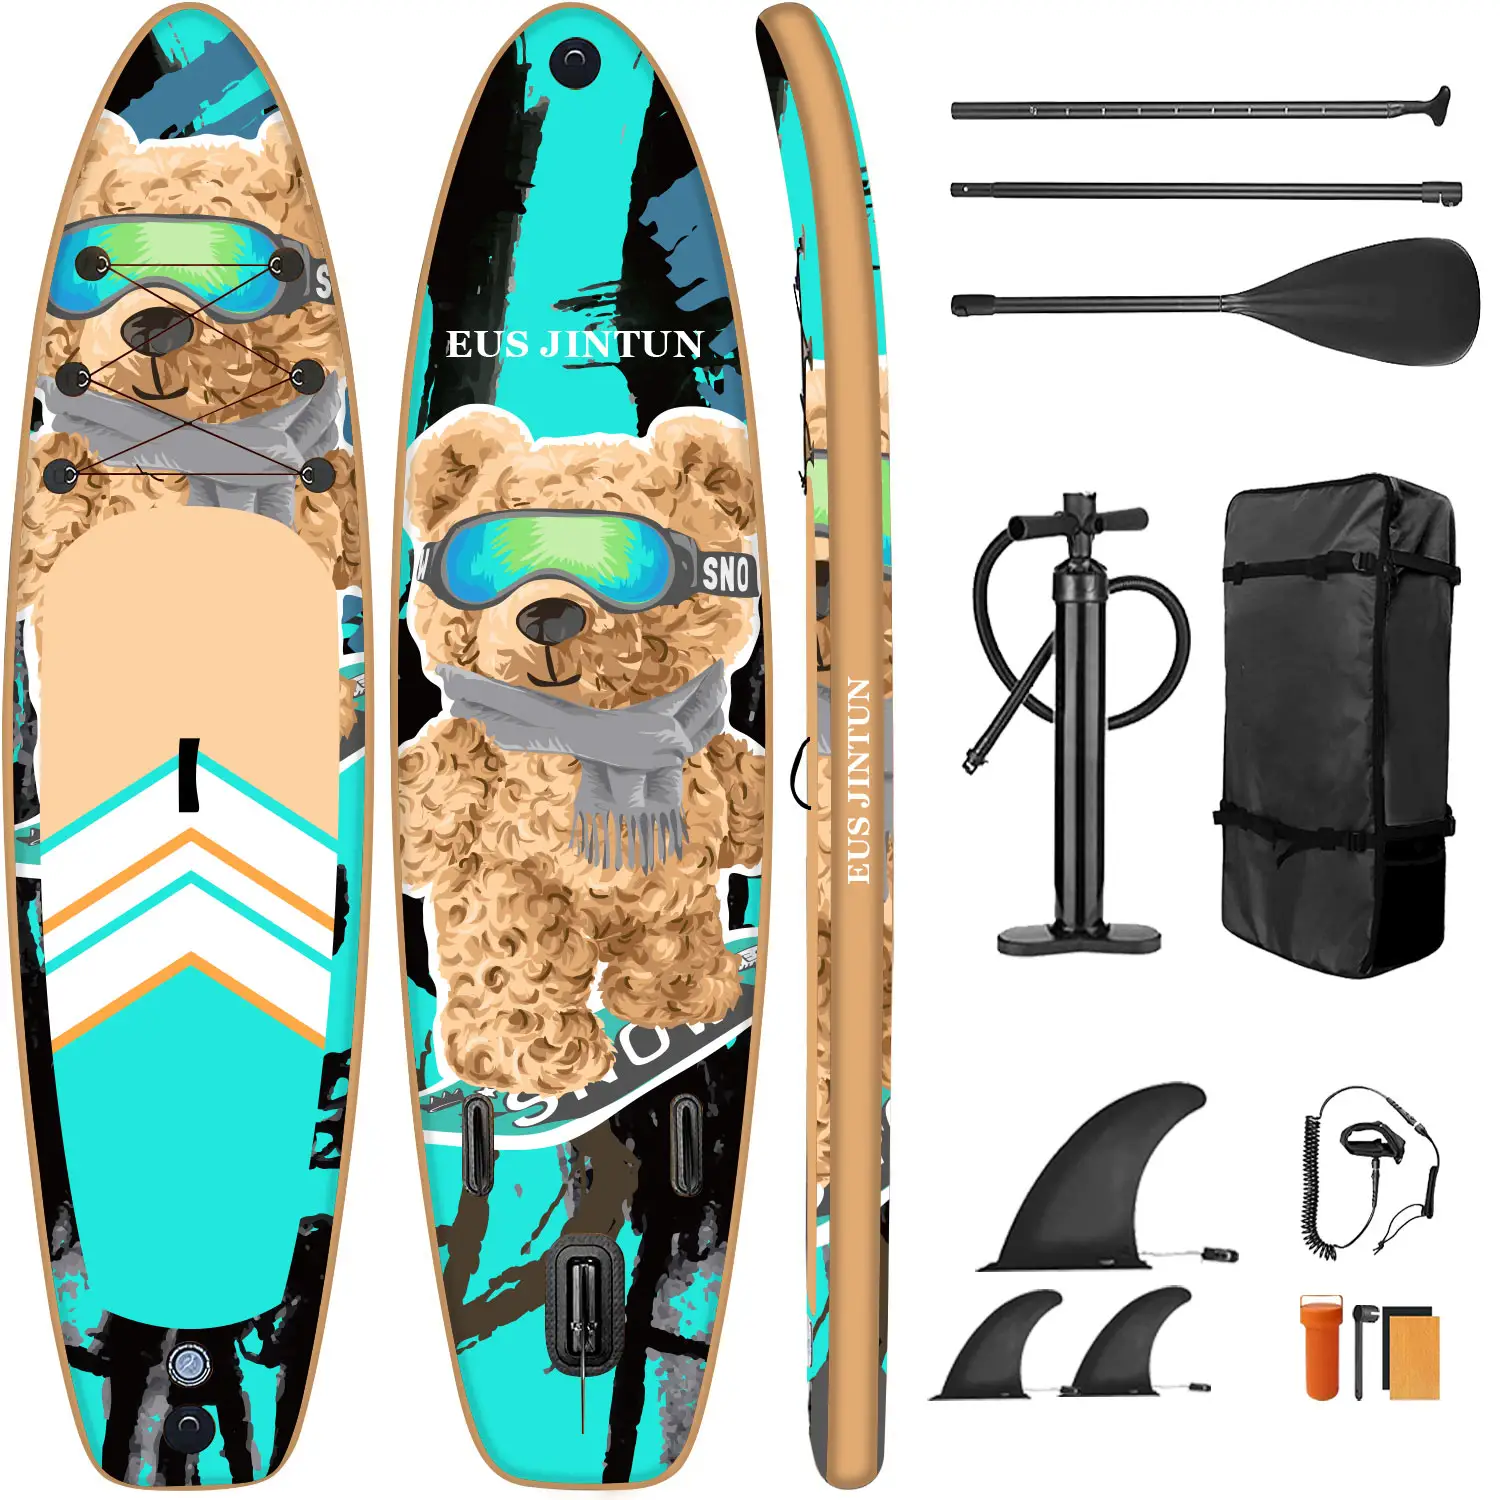 OEM all'ingrosso SUP a buon mercato surf drop stitch cool isup linfa da pesca gonfiabile stand up paddle board